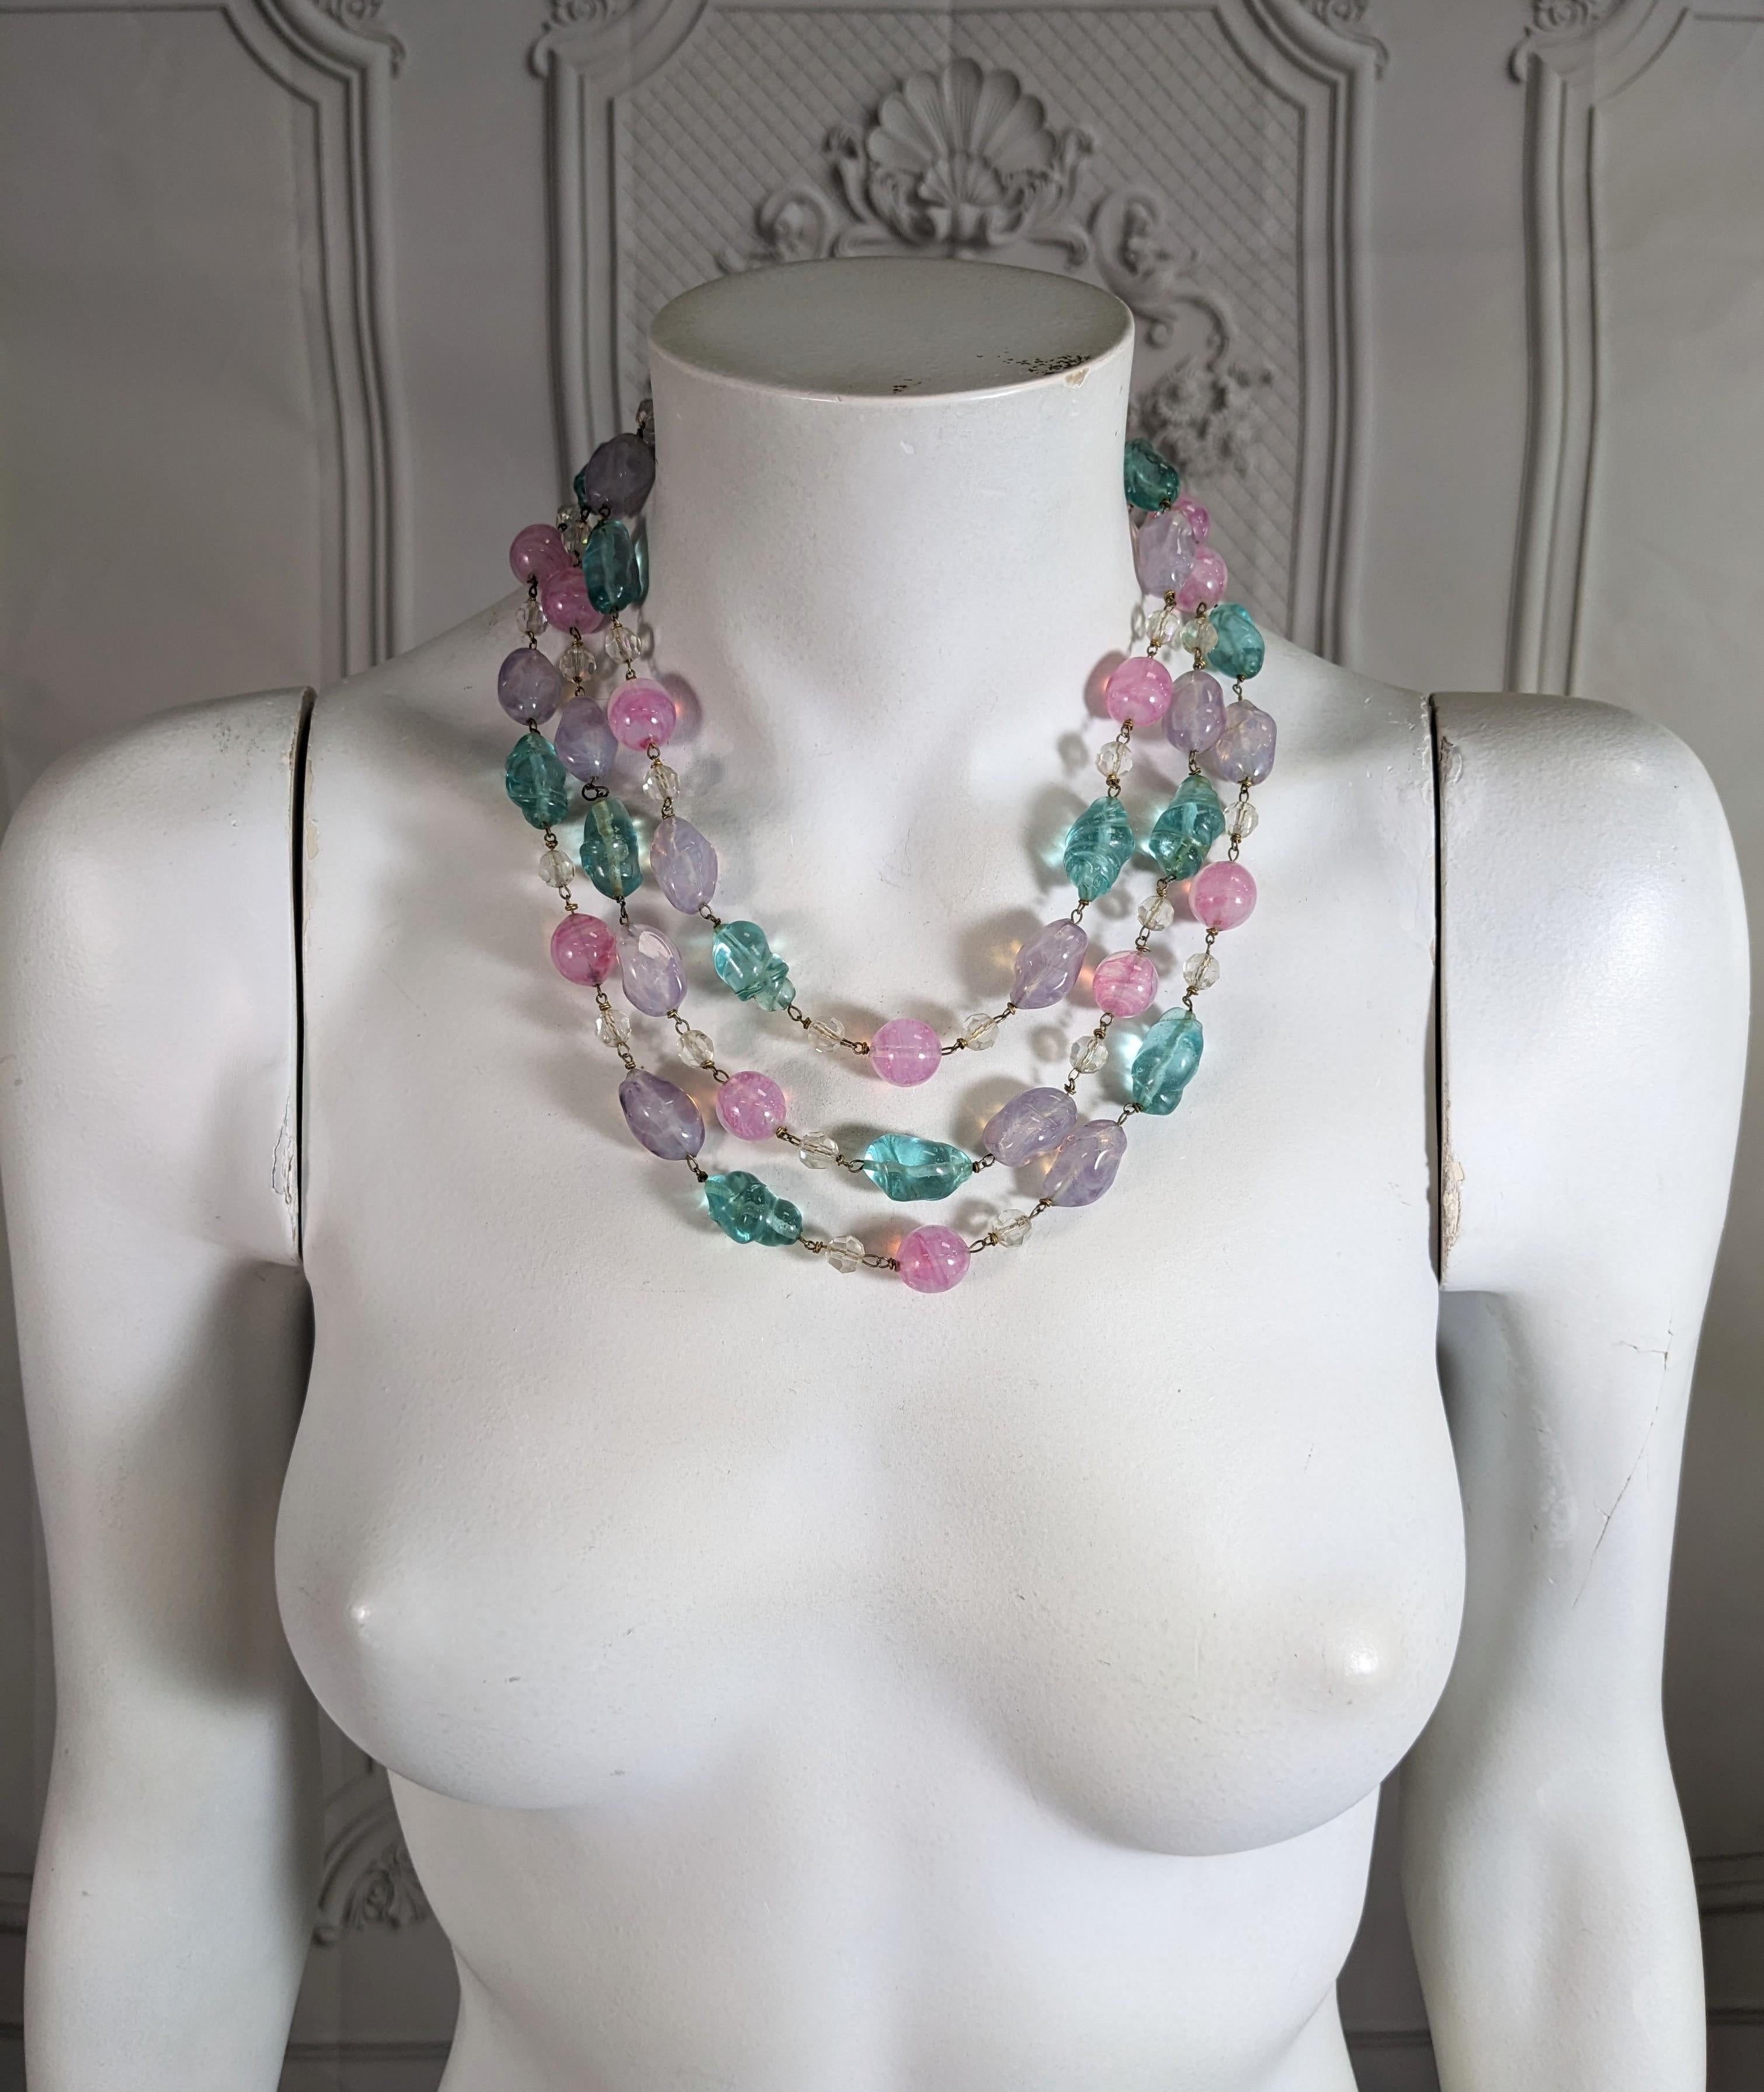 Louis Rousselet Pastel Bead Necklace In Excellent Condition For Sale In New York, NY